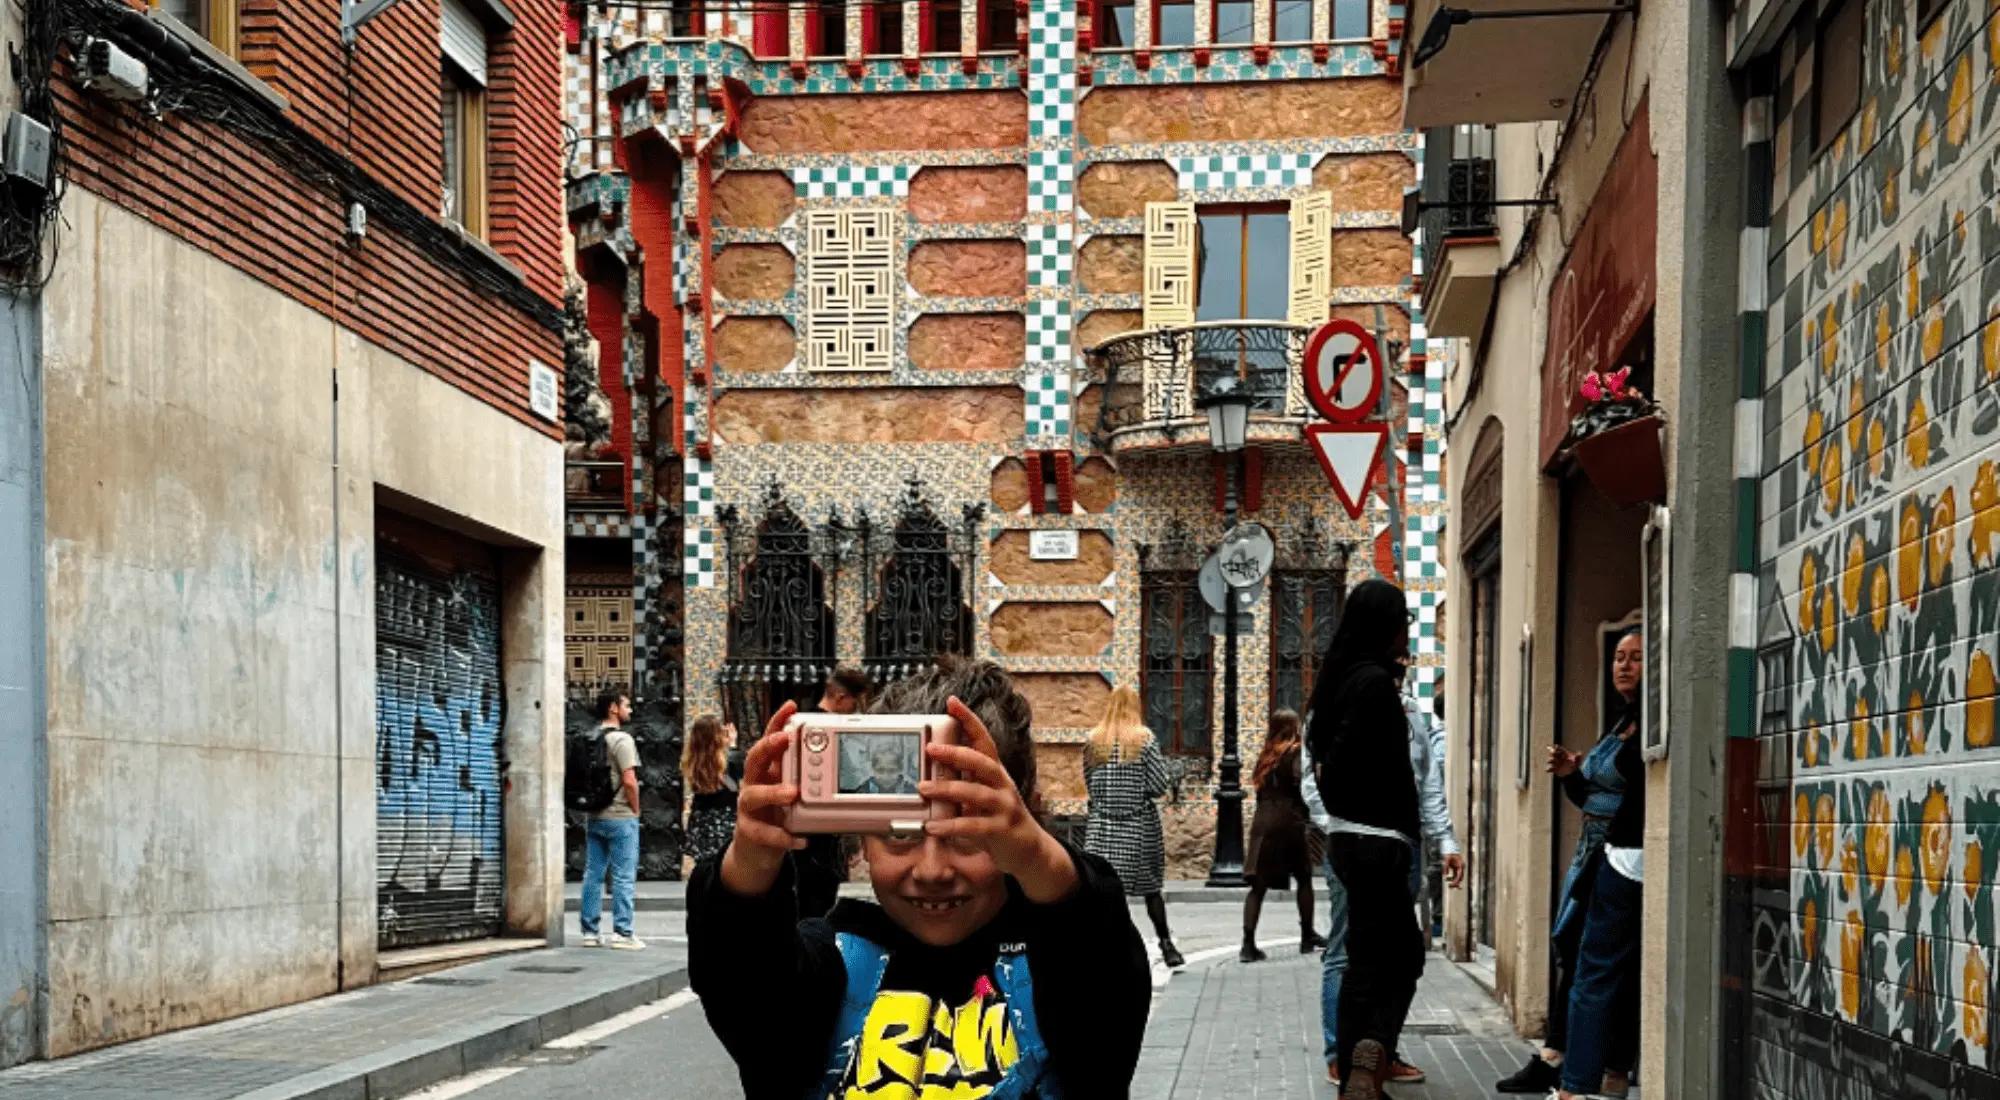 Digital nomad kid taking pictures while traveling